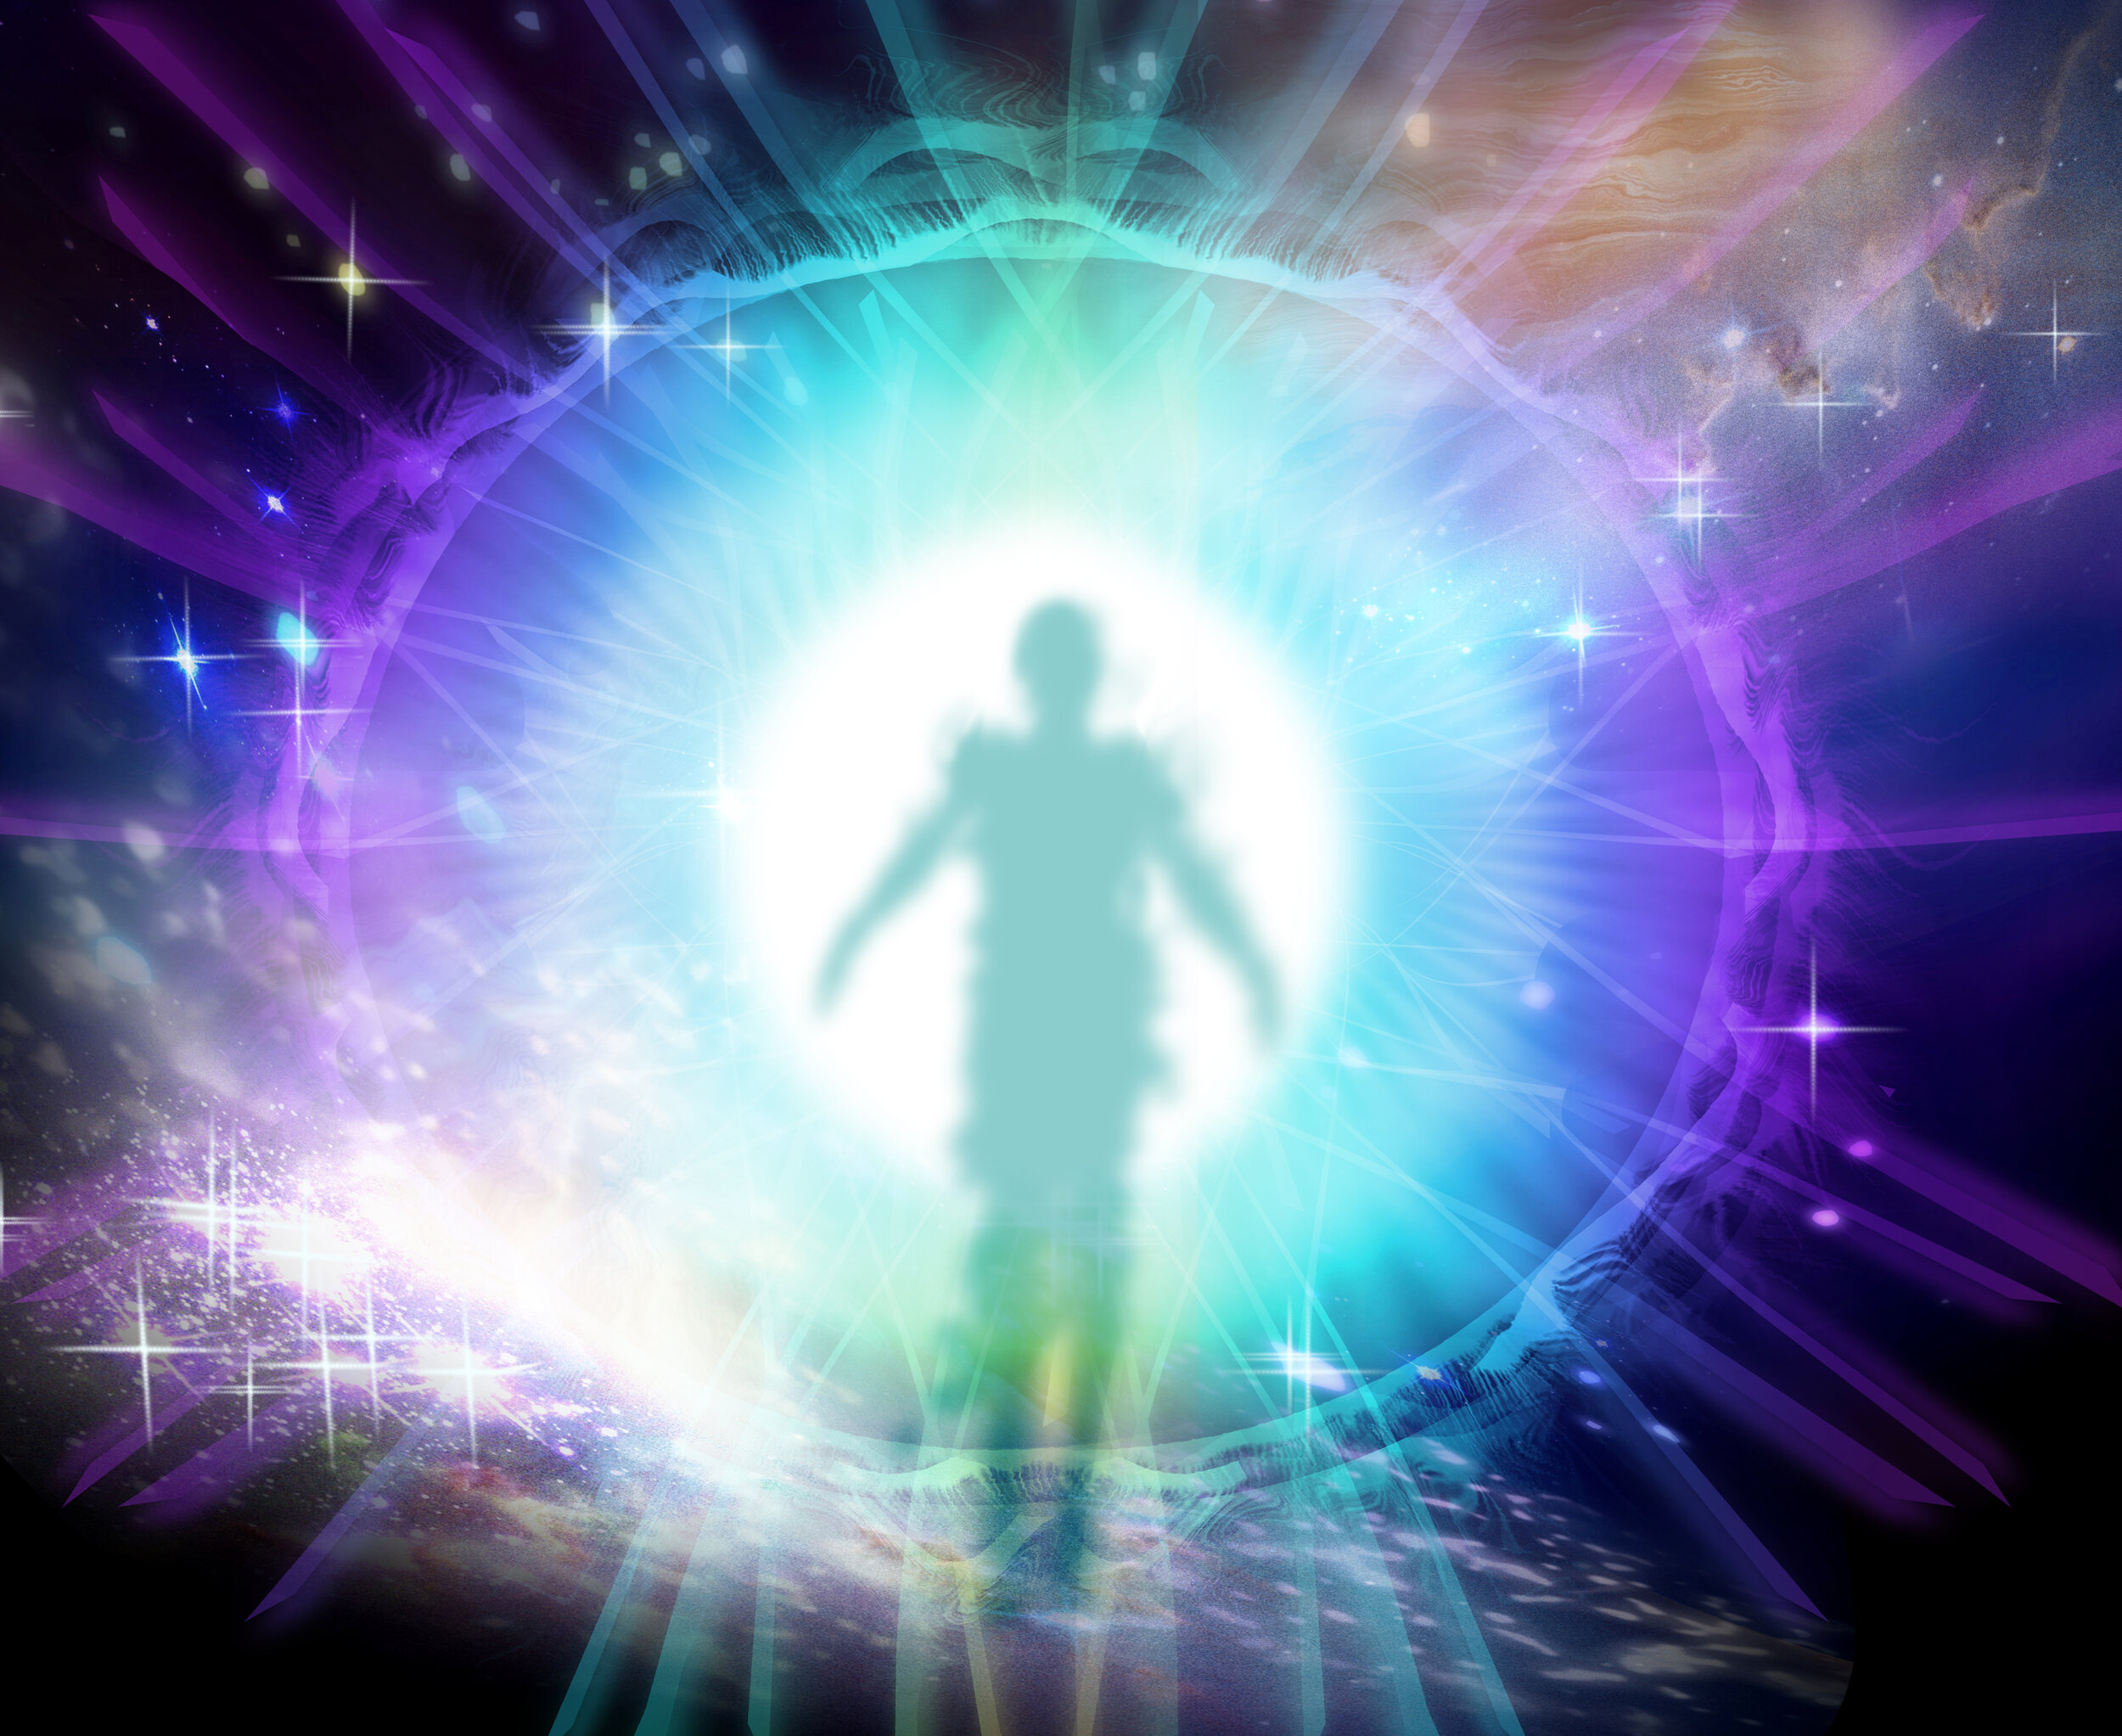  Illustration of a human figure in the center of a colorful aura with a starry background.